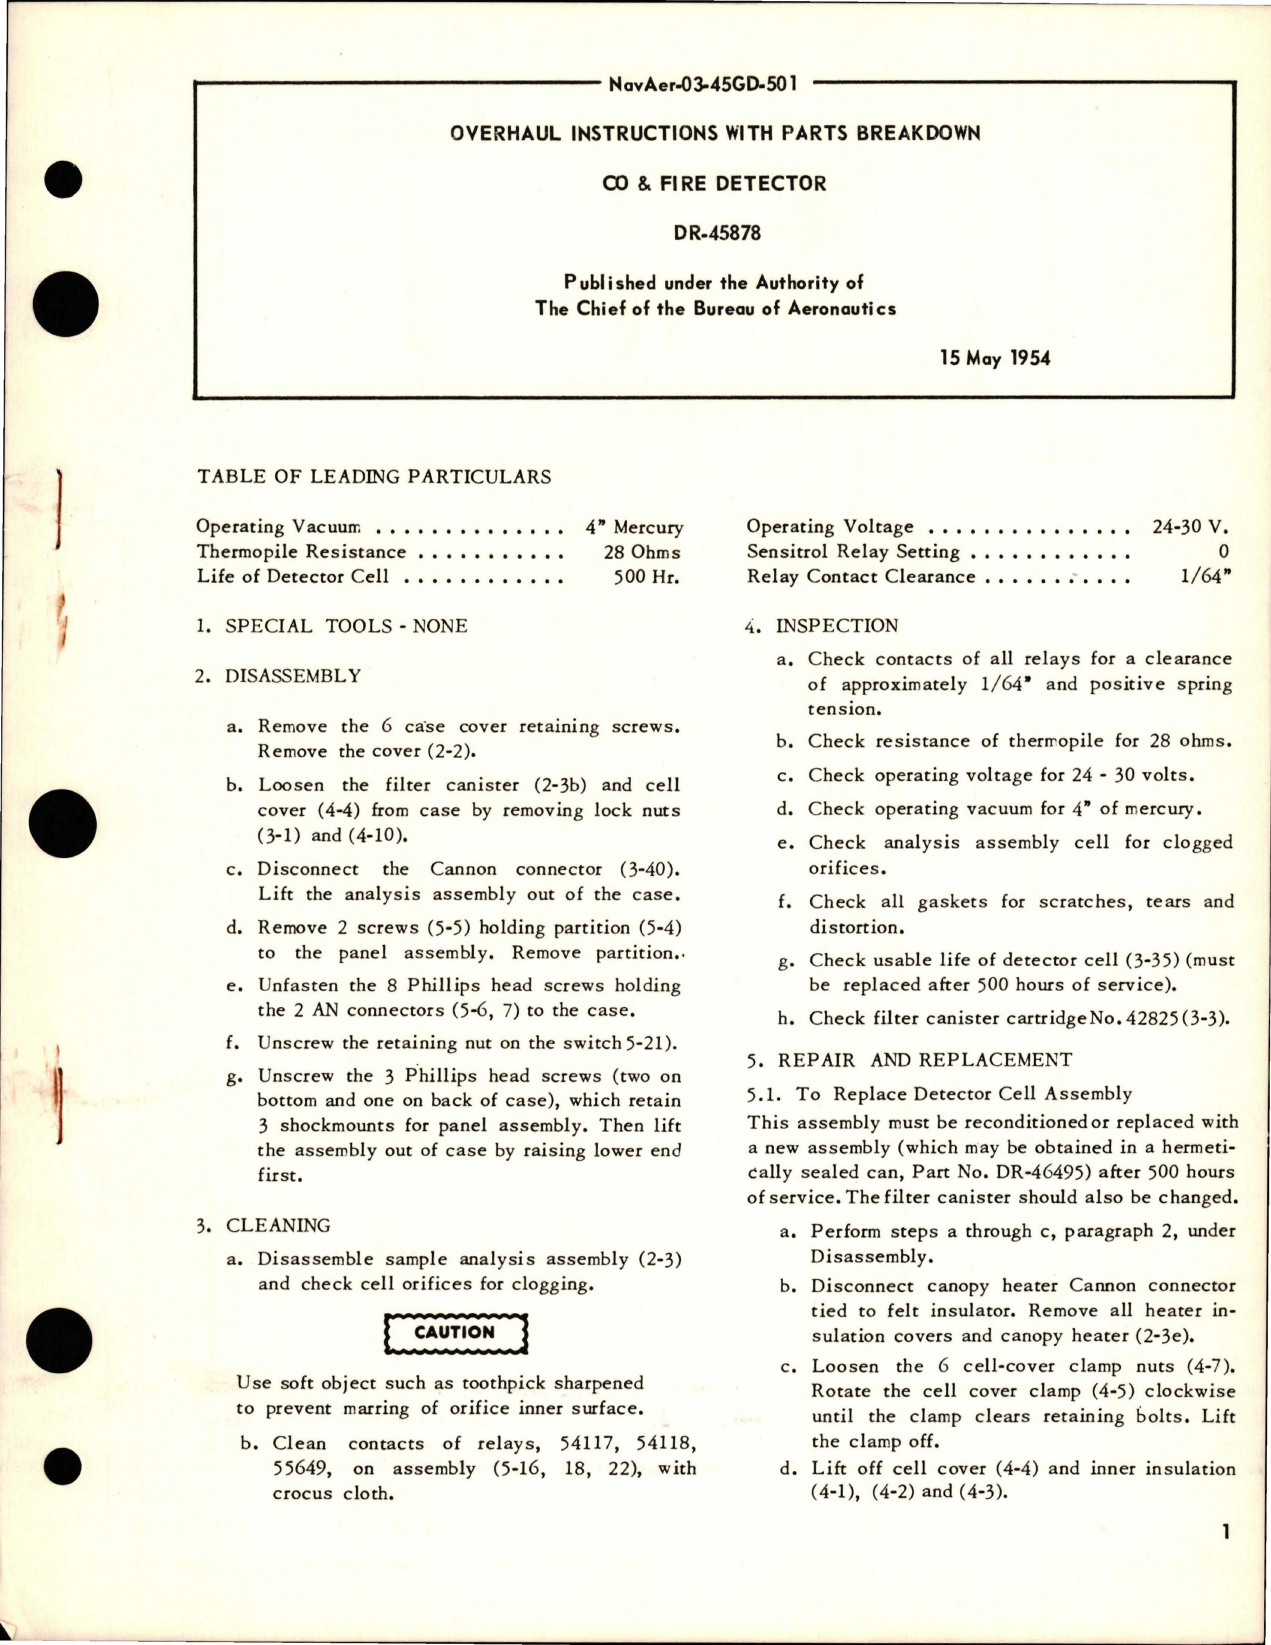 Sample page 1 from AirCorps Library document: Overhaul Instructions with Parts Breakdown for CO & Fire Detector - DR-45878